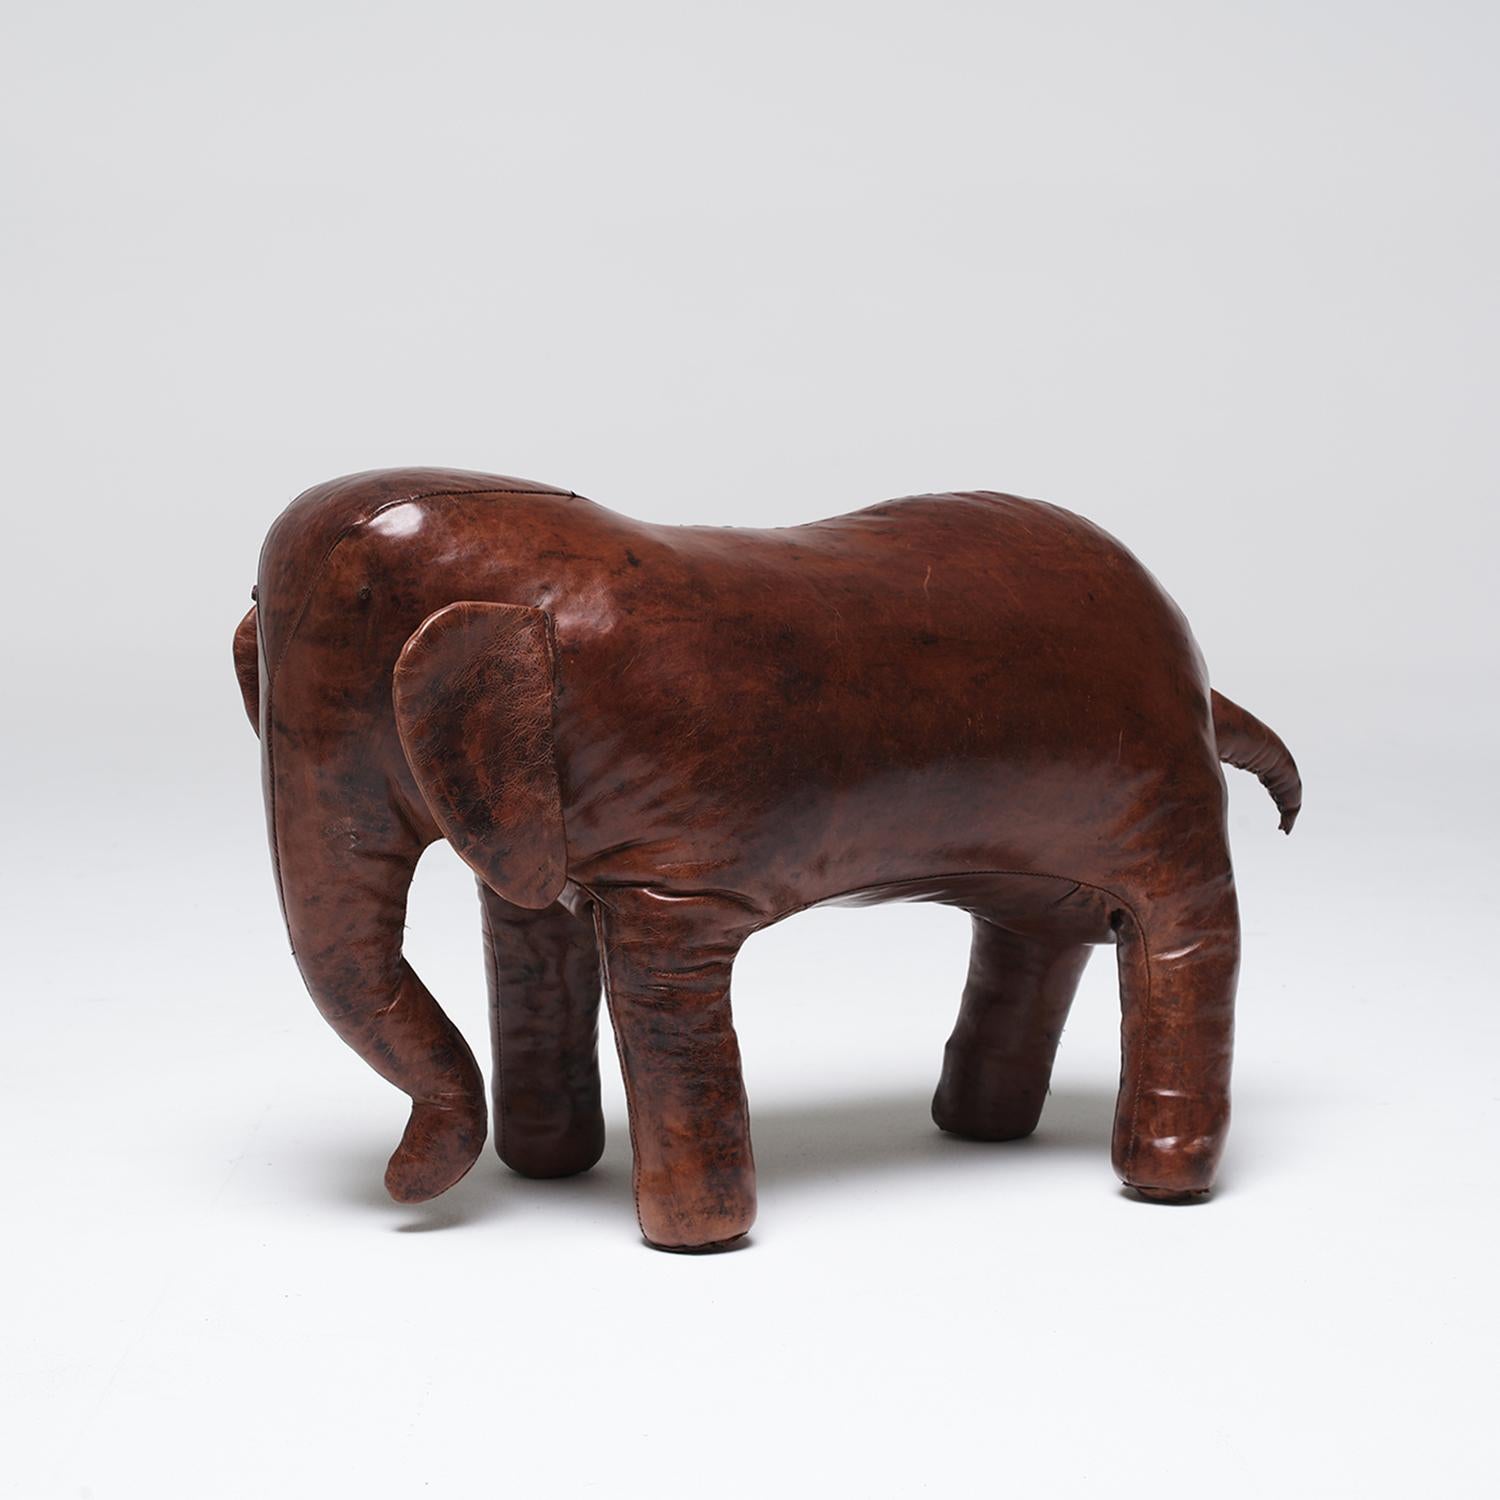 20th Century English Vintage Elephant Footstool in Leather by Dimitri Omersa For Sale 1